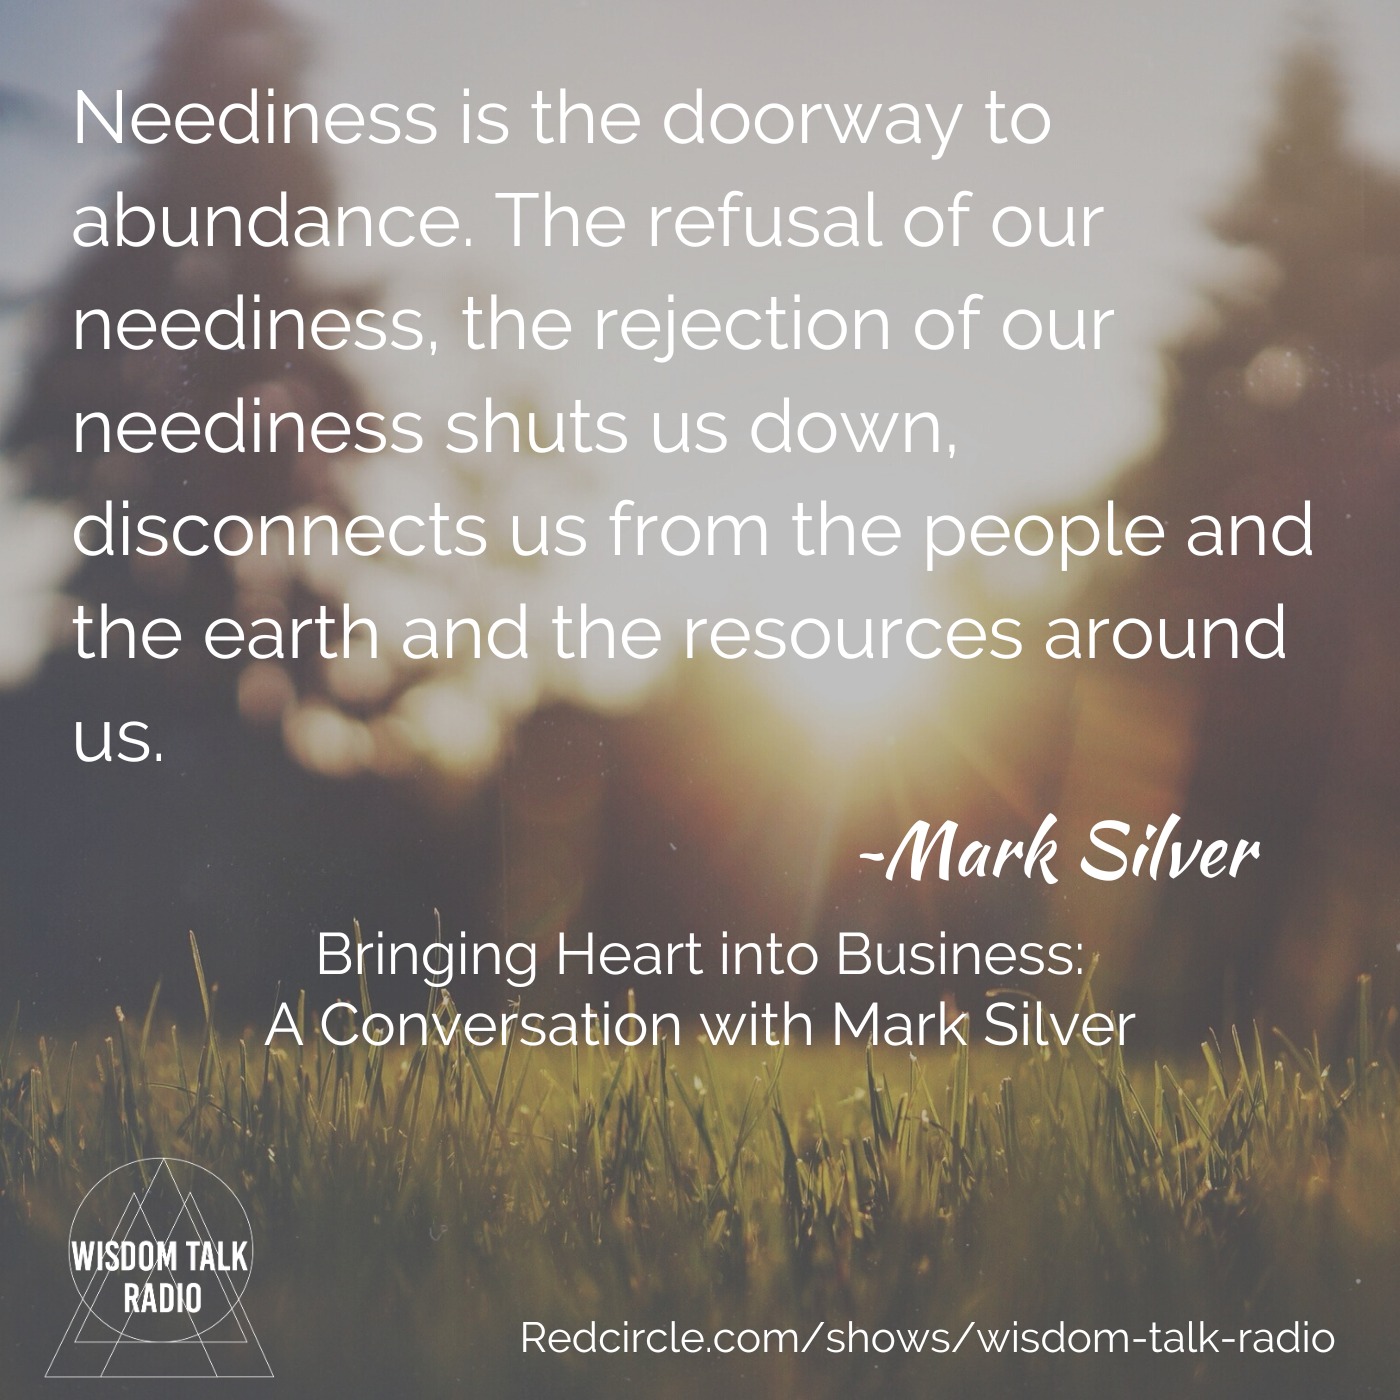 Bringing Heart into Business: A Conversation with Mark Silver